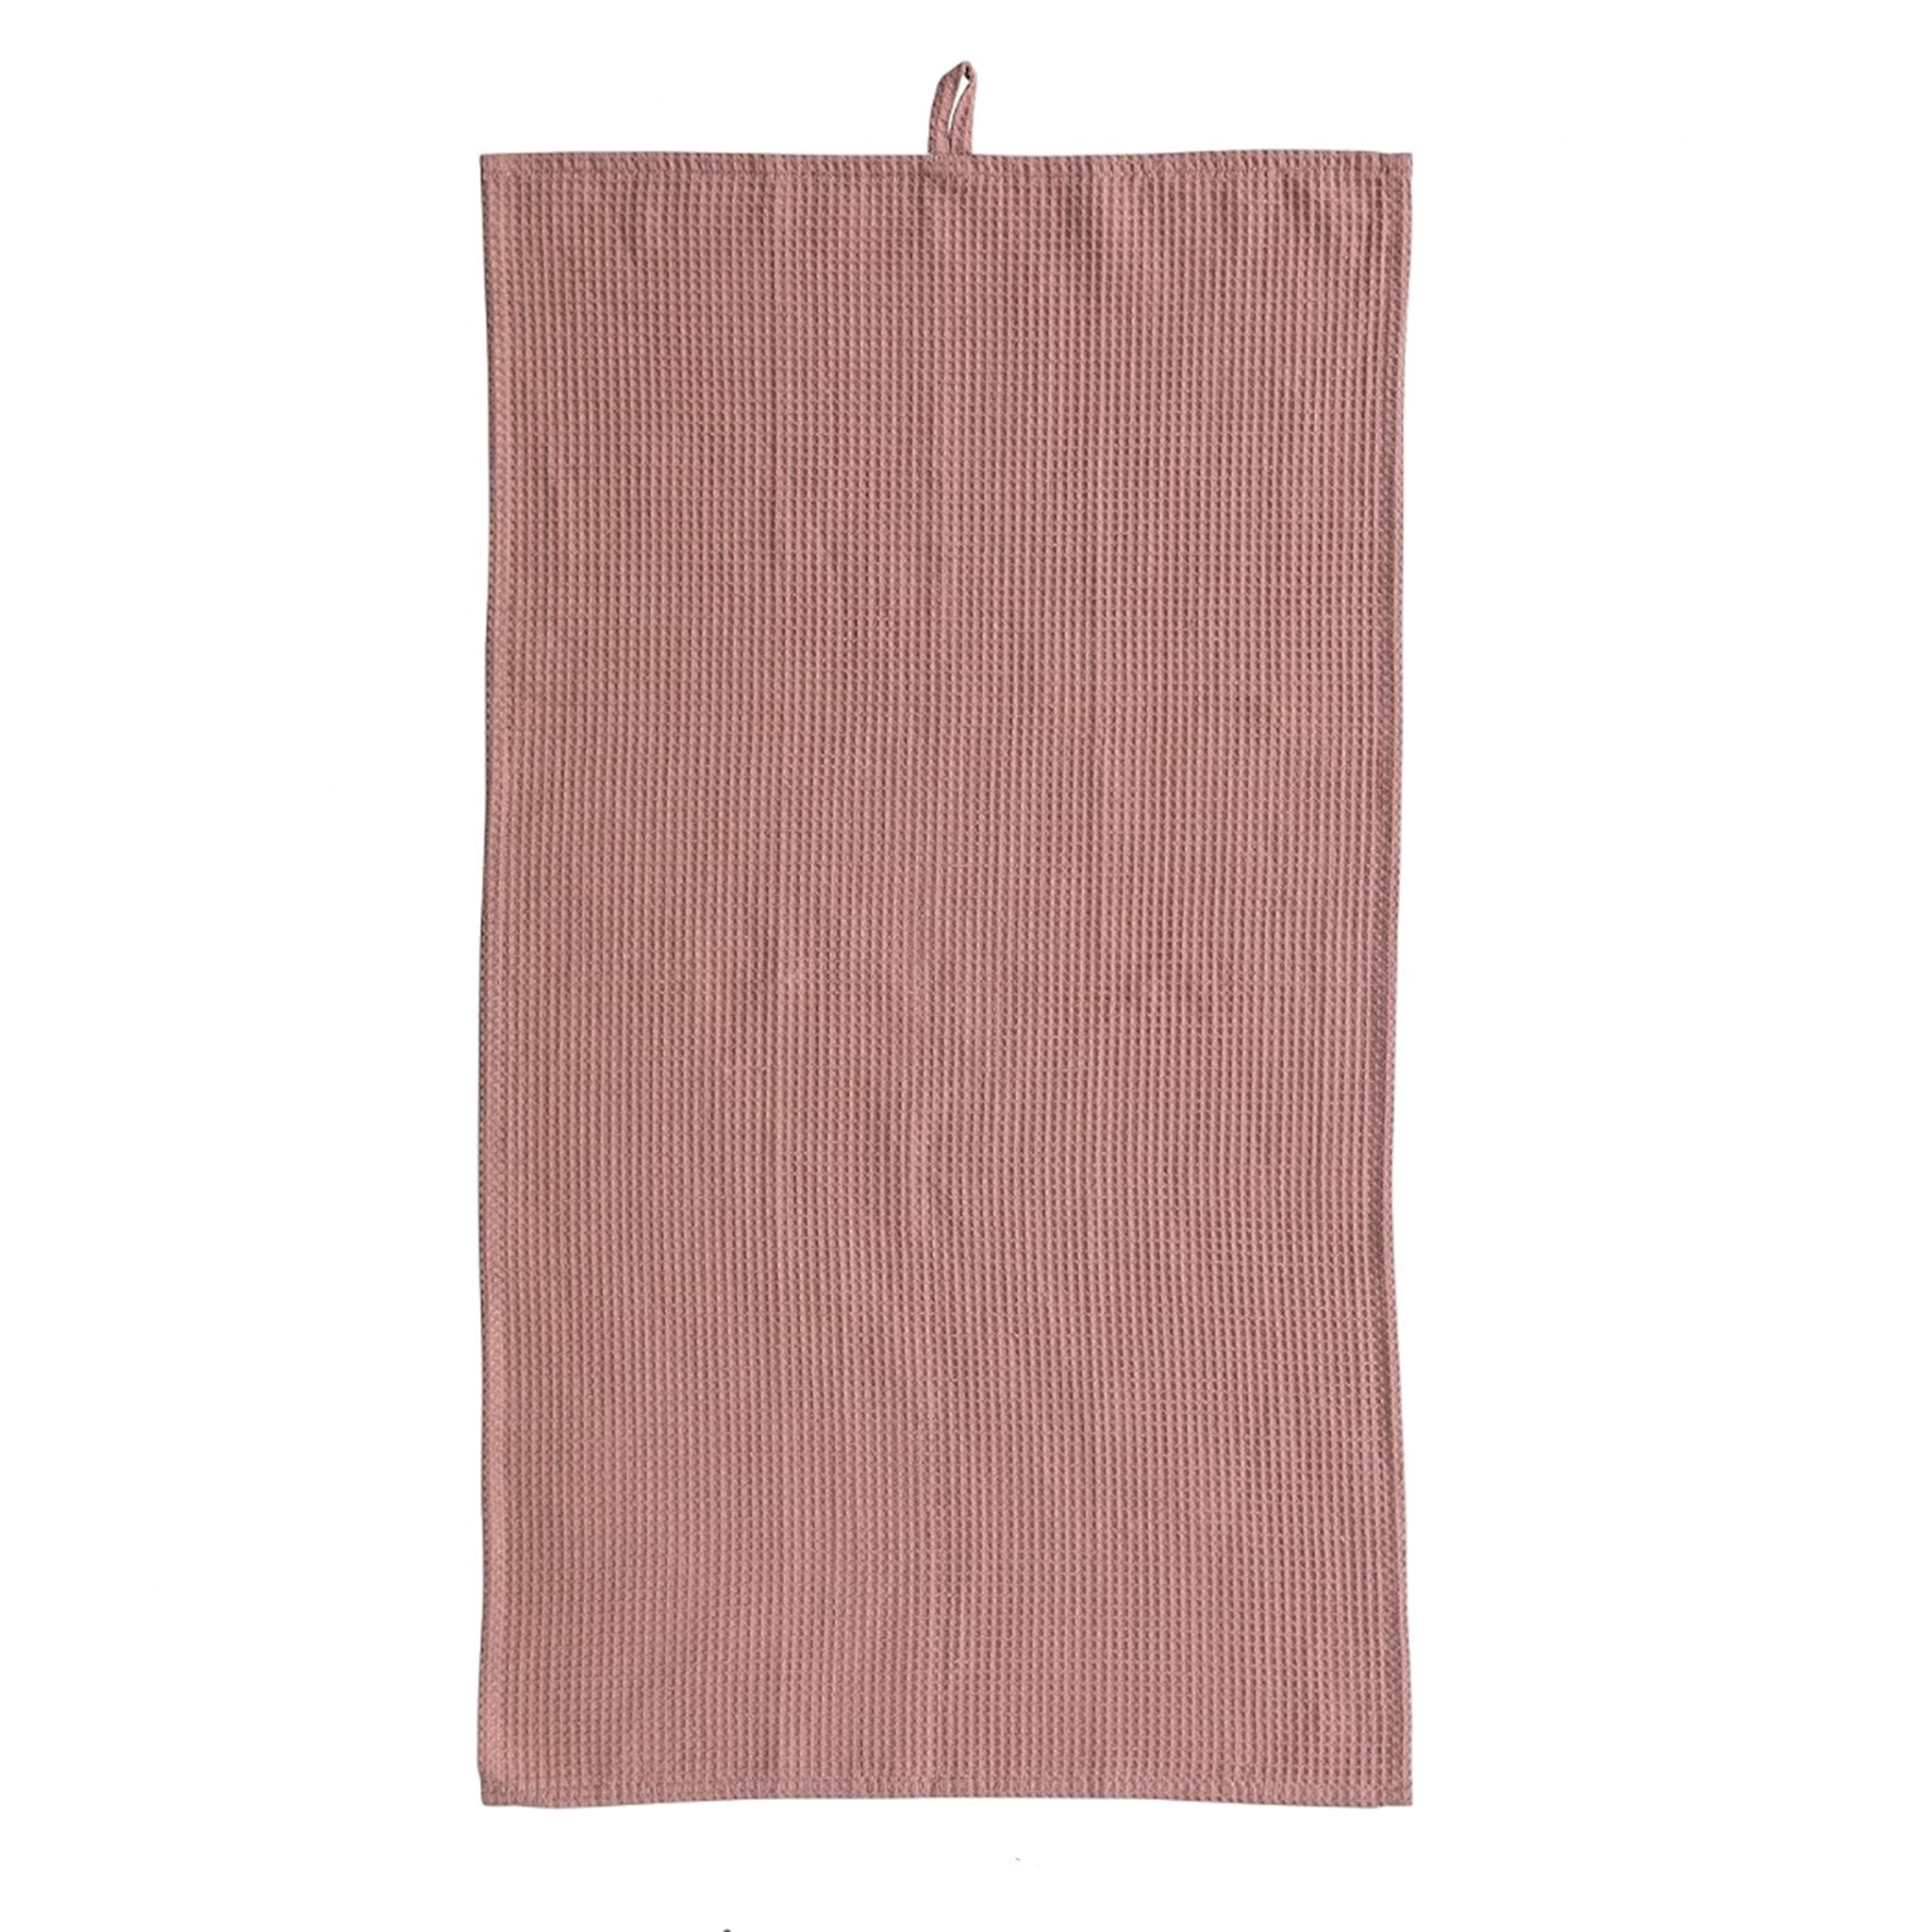 On a white background is a rose colored waffle knit tea towel with a loop at the top for convenient hanging. 